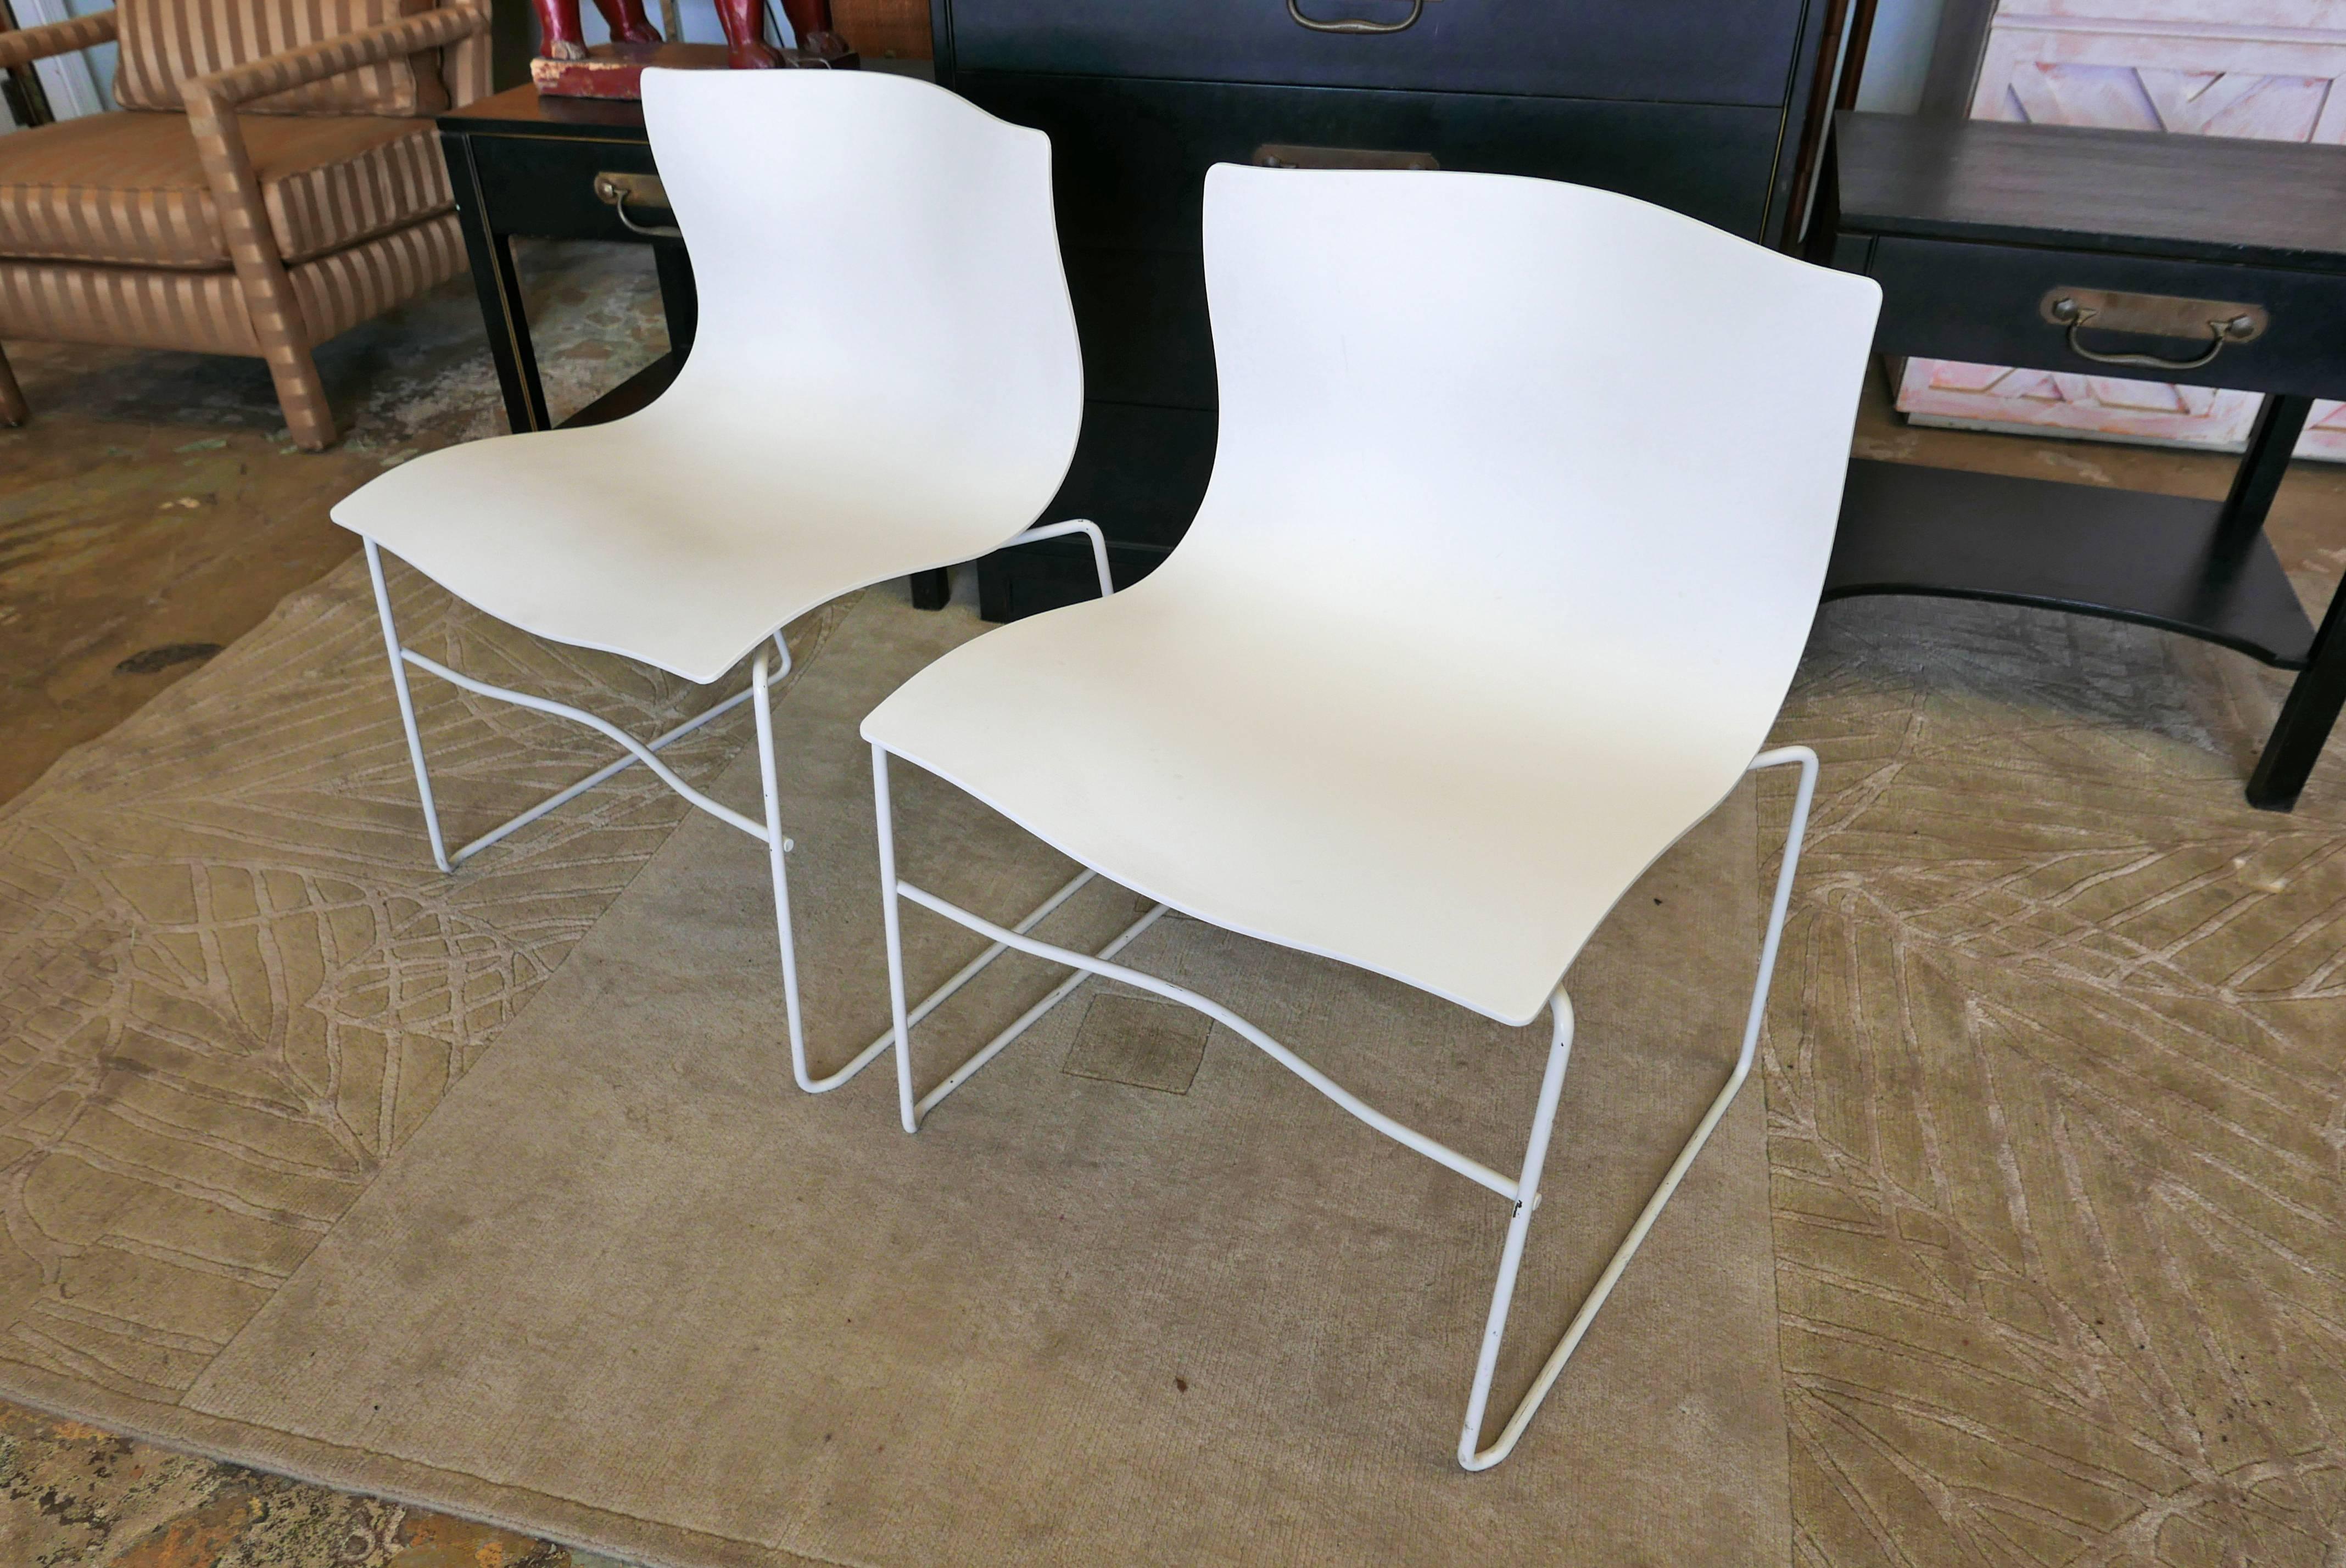 Pair of Knoll Mid-Century chairs in luminous white. Very comfortable, wonderfully sculptural. Modern design, sophisticated for office, dining, side chairs.